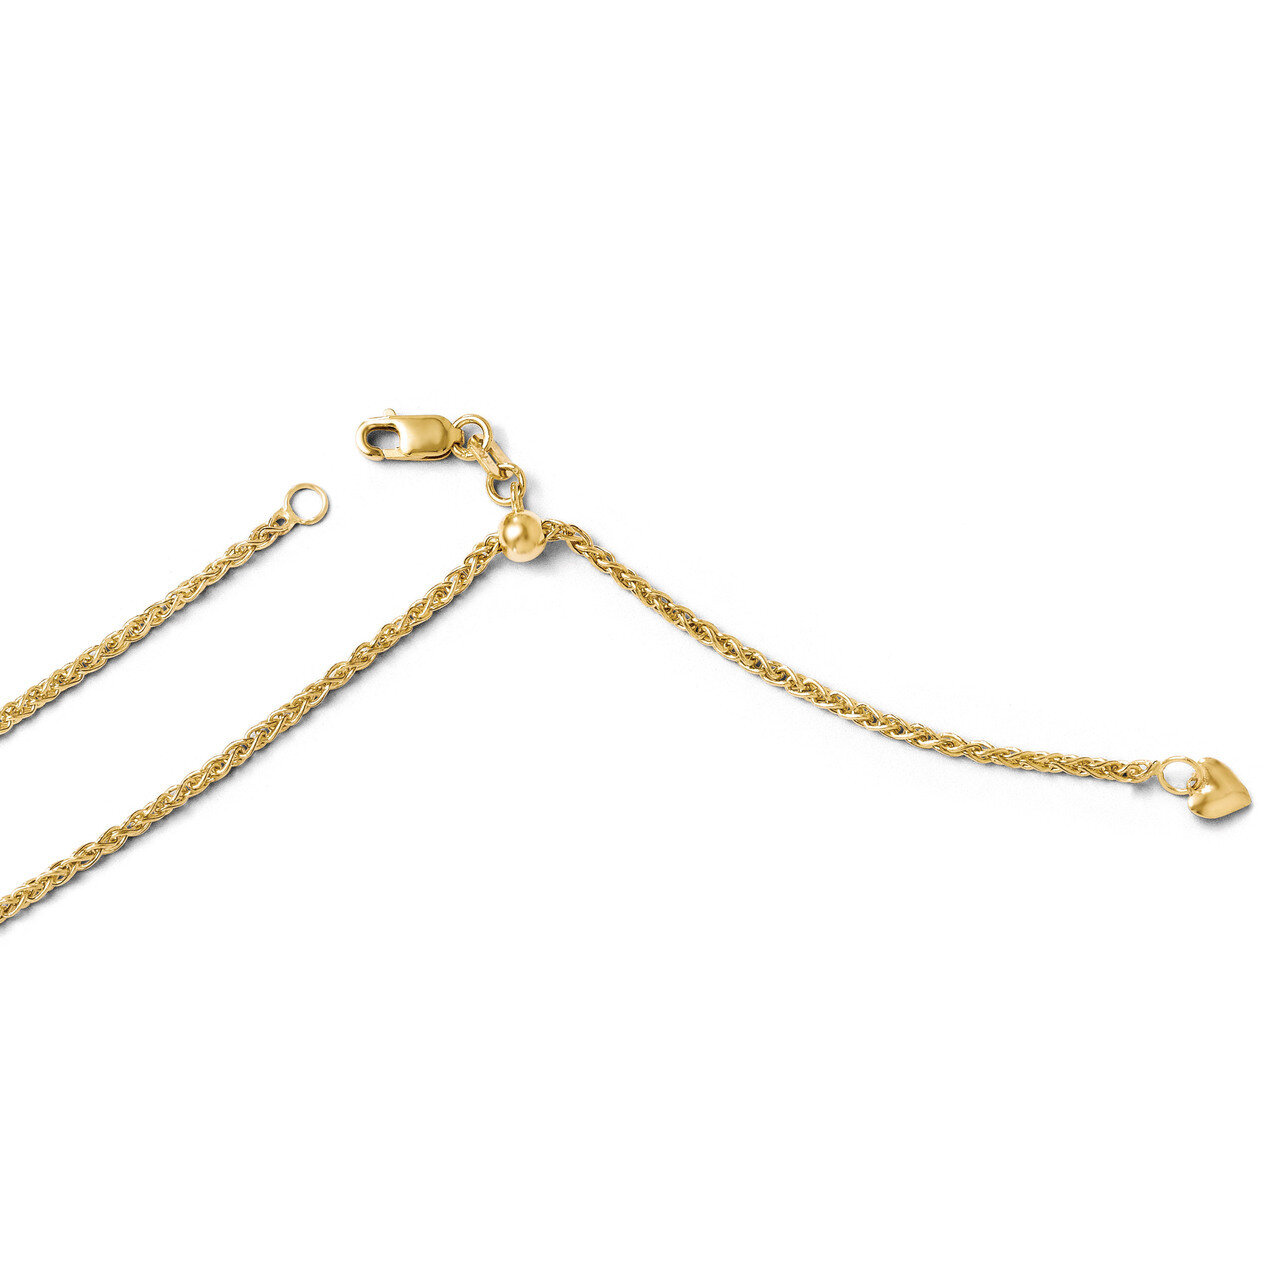 Adjustable Semi Solid Chain 22 Inch - 14k Gold HB-1208-22